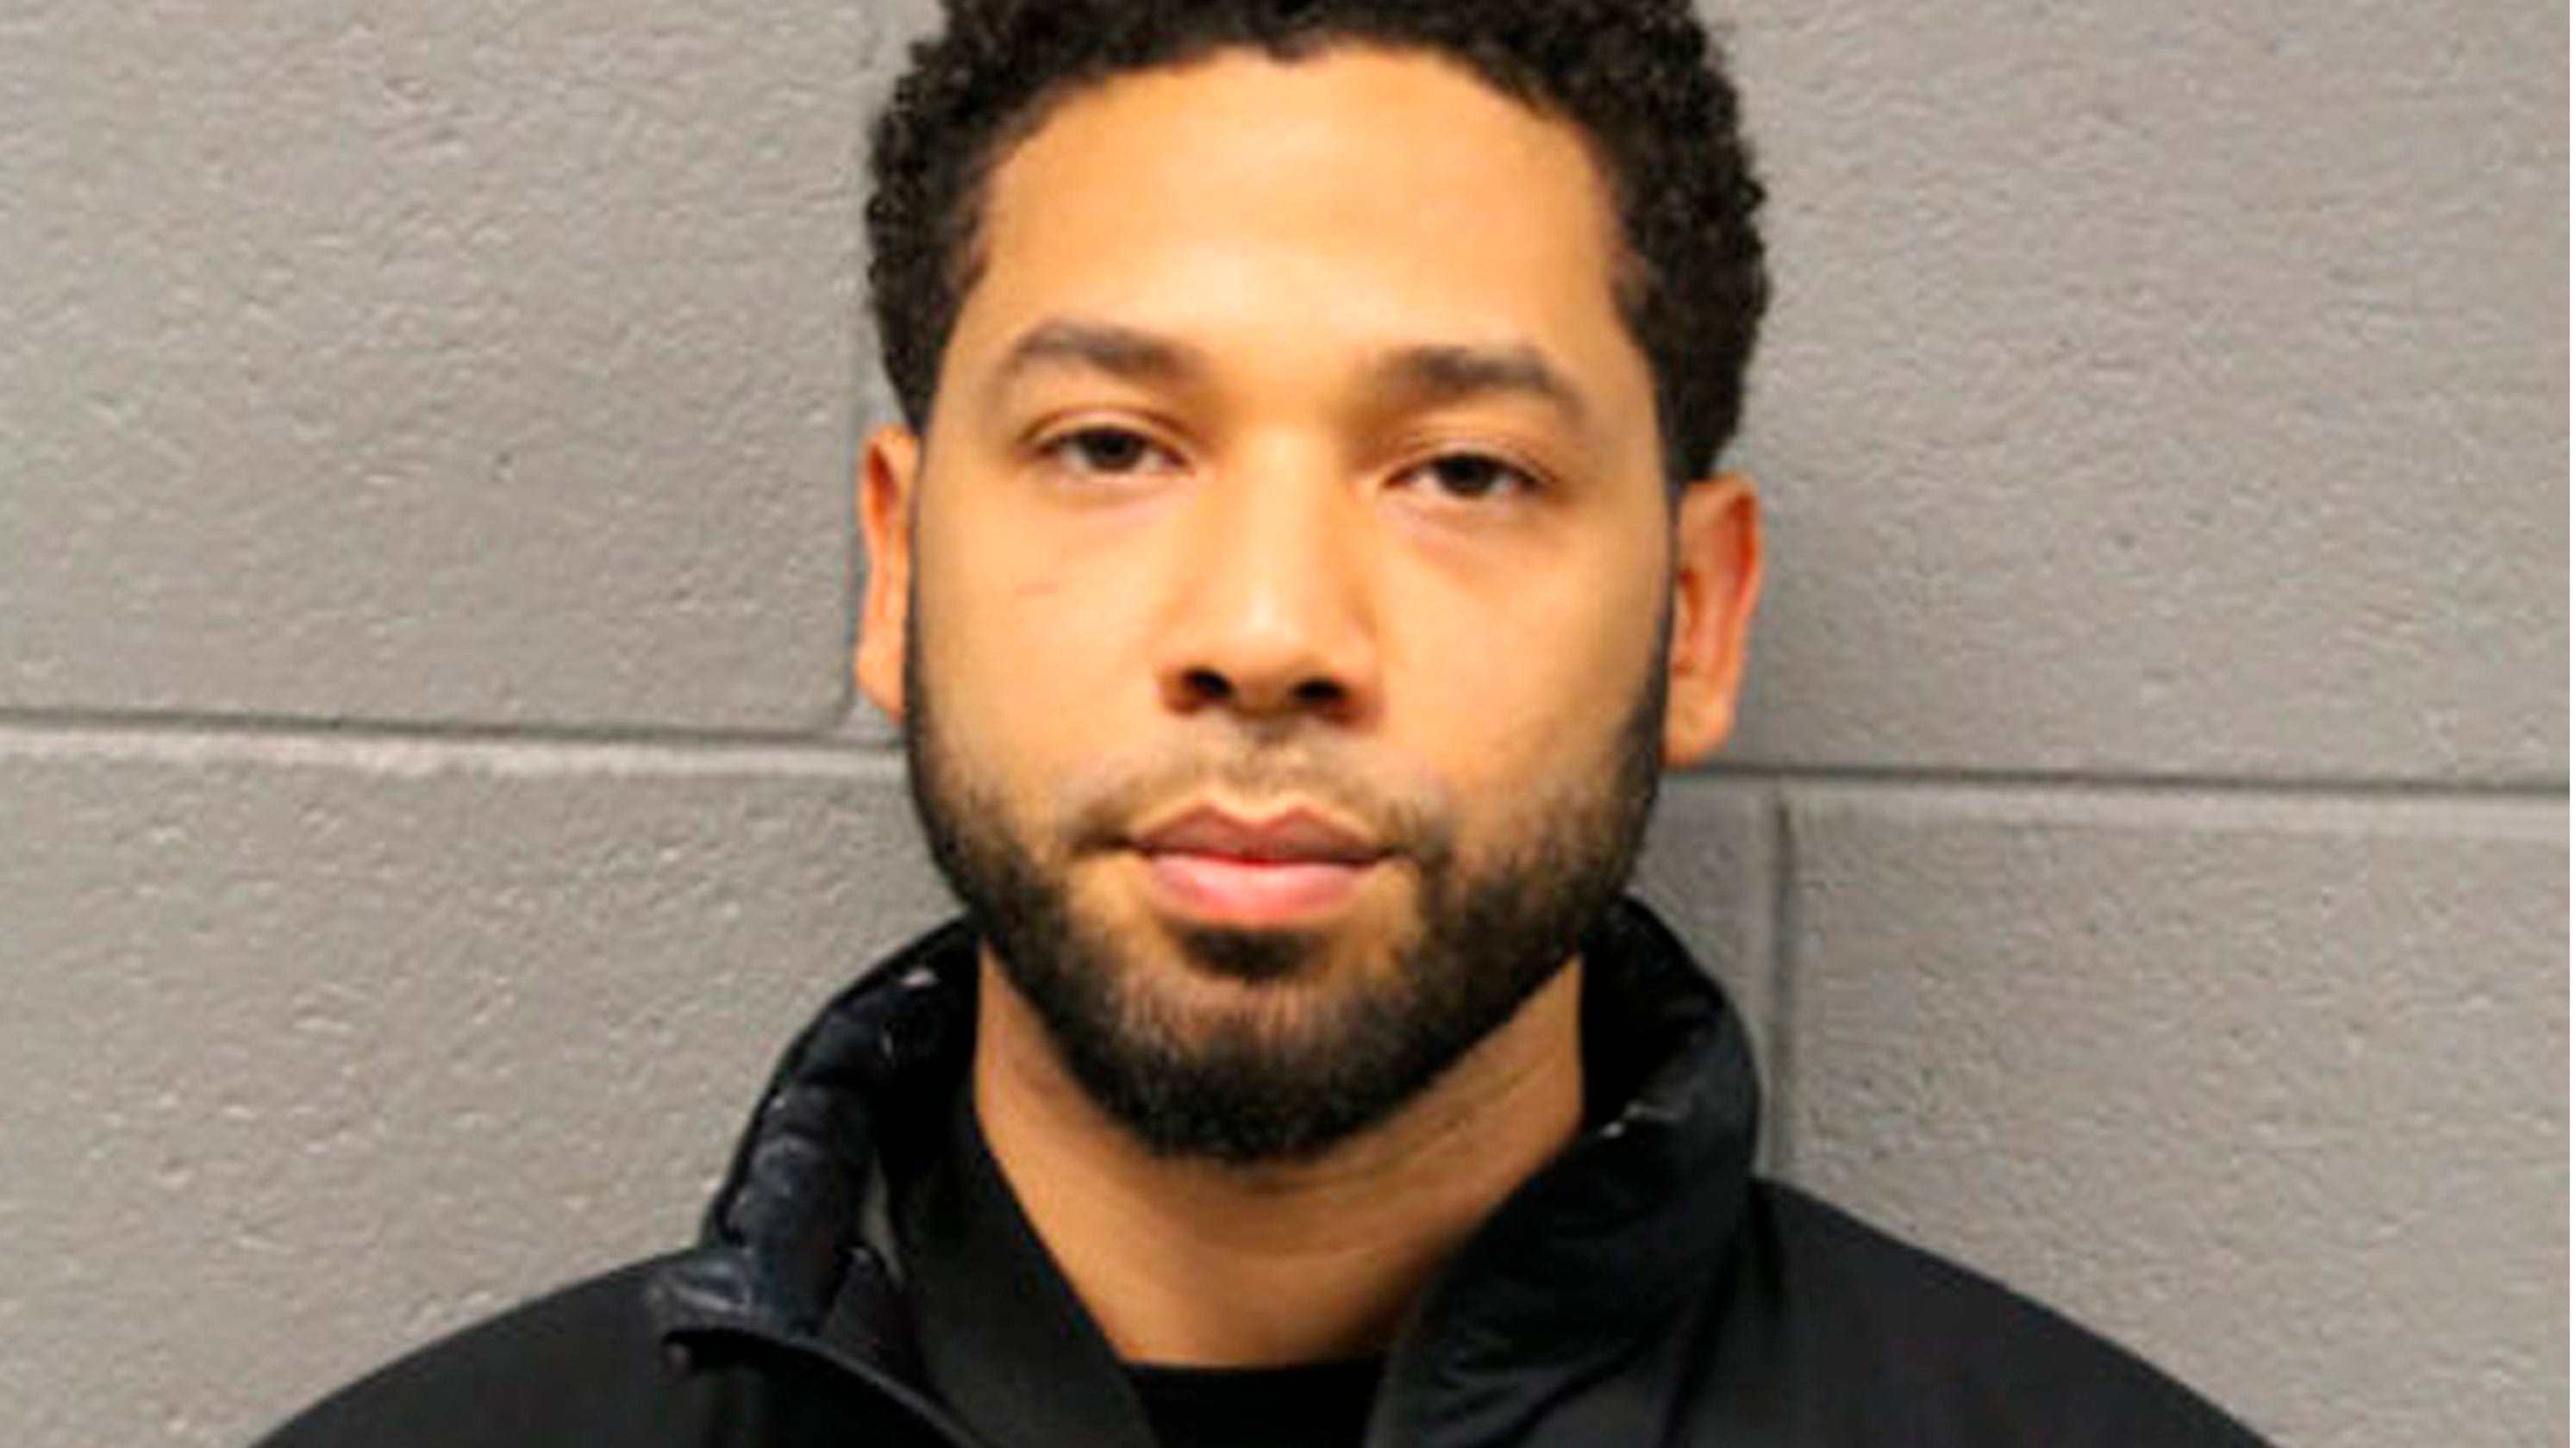 Jussie Smollett attack may be fake, but hate violence is rising